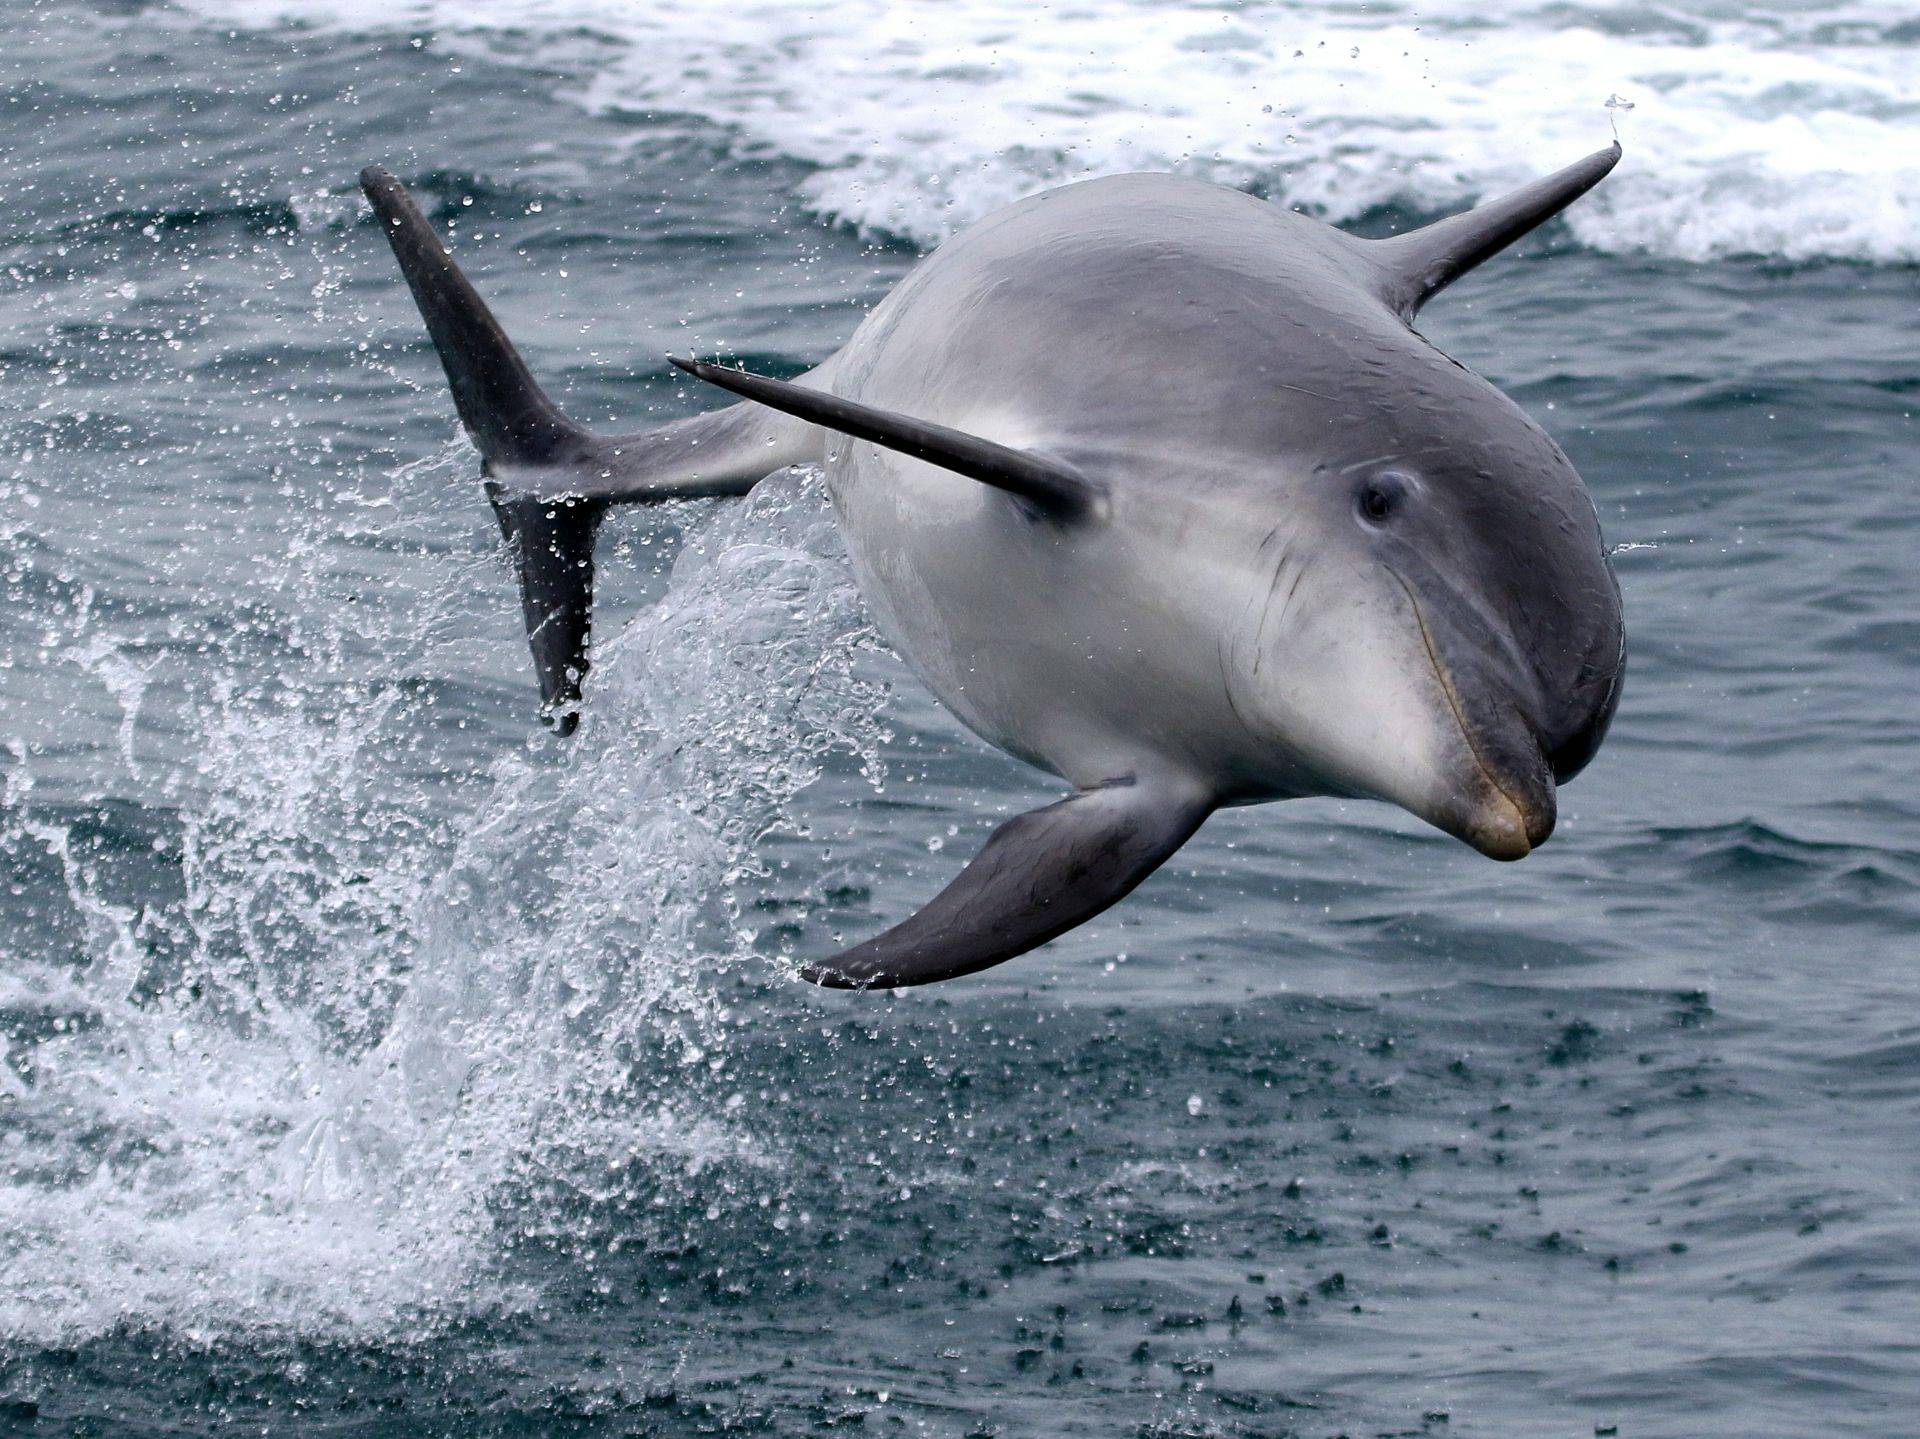 weymouth boat trips to see dolphins prices